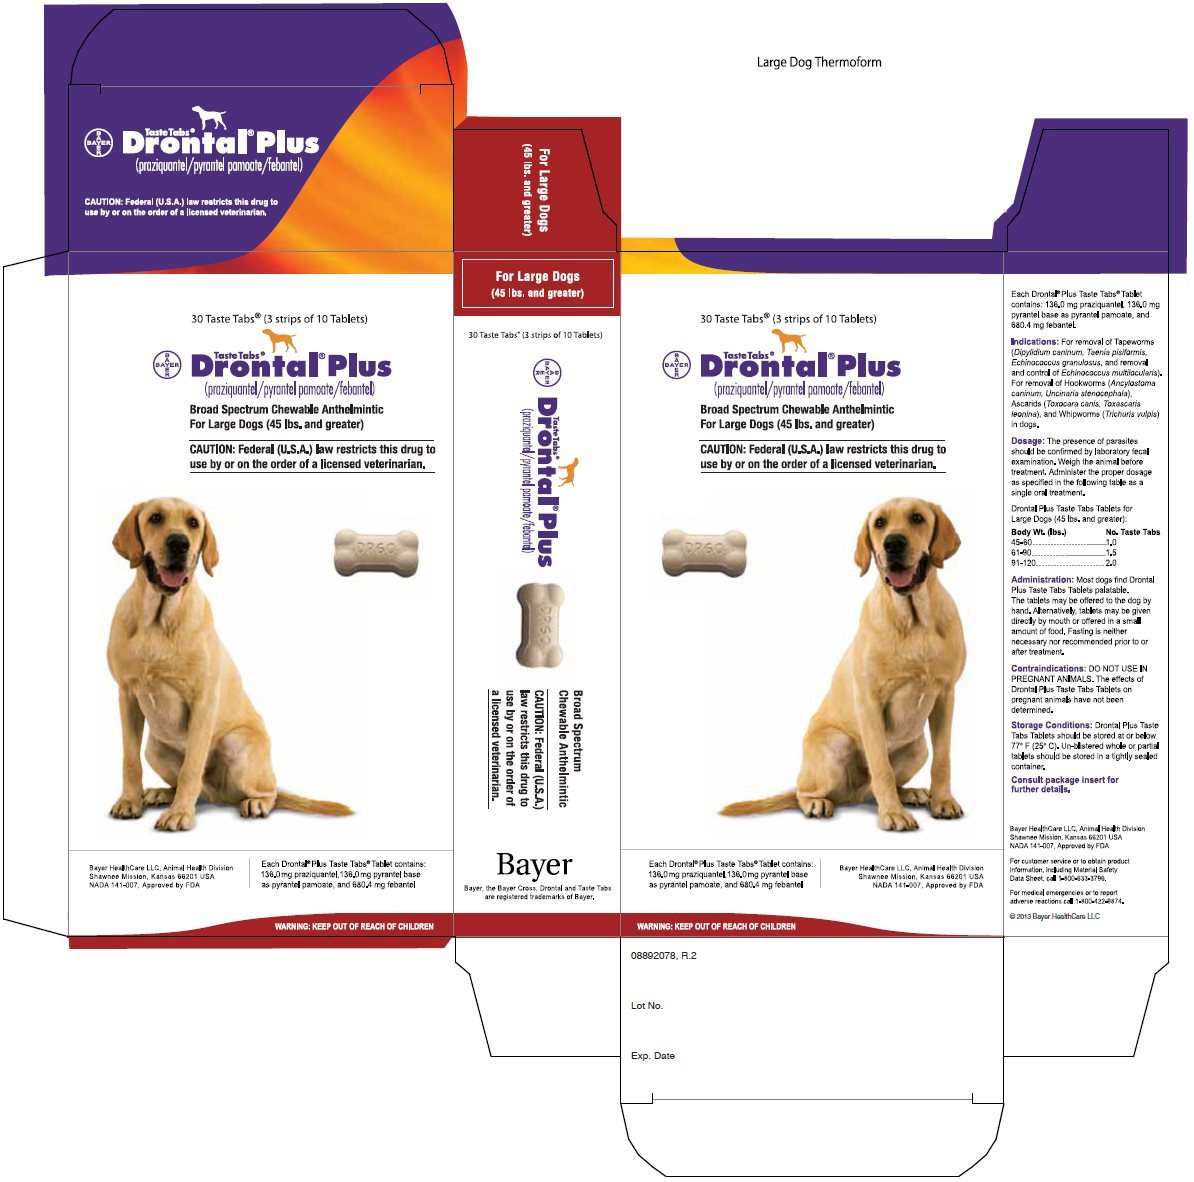 Drontal Plus Taste Tsbs for Large Dogs (45 lbs. and greater) label